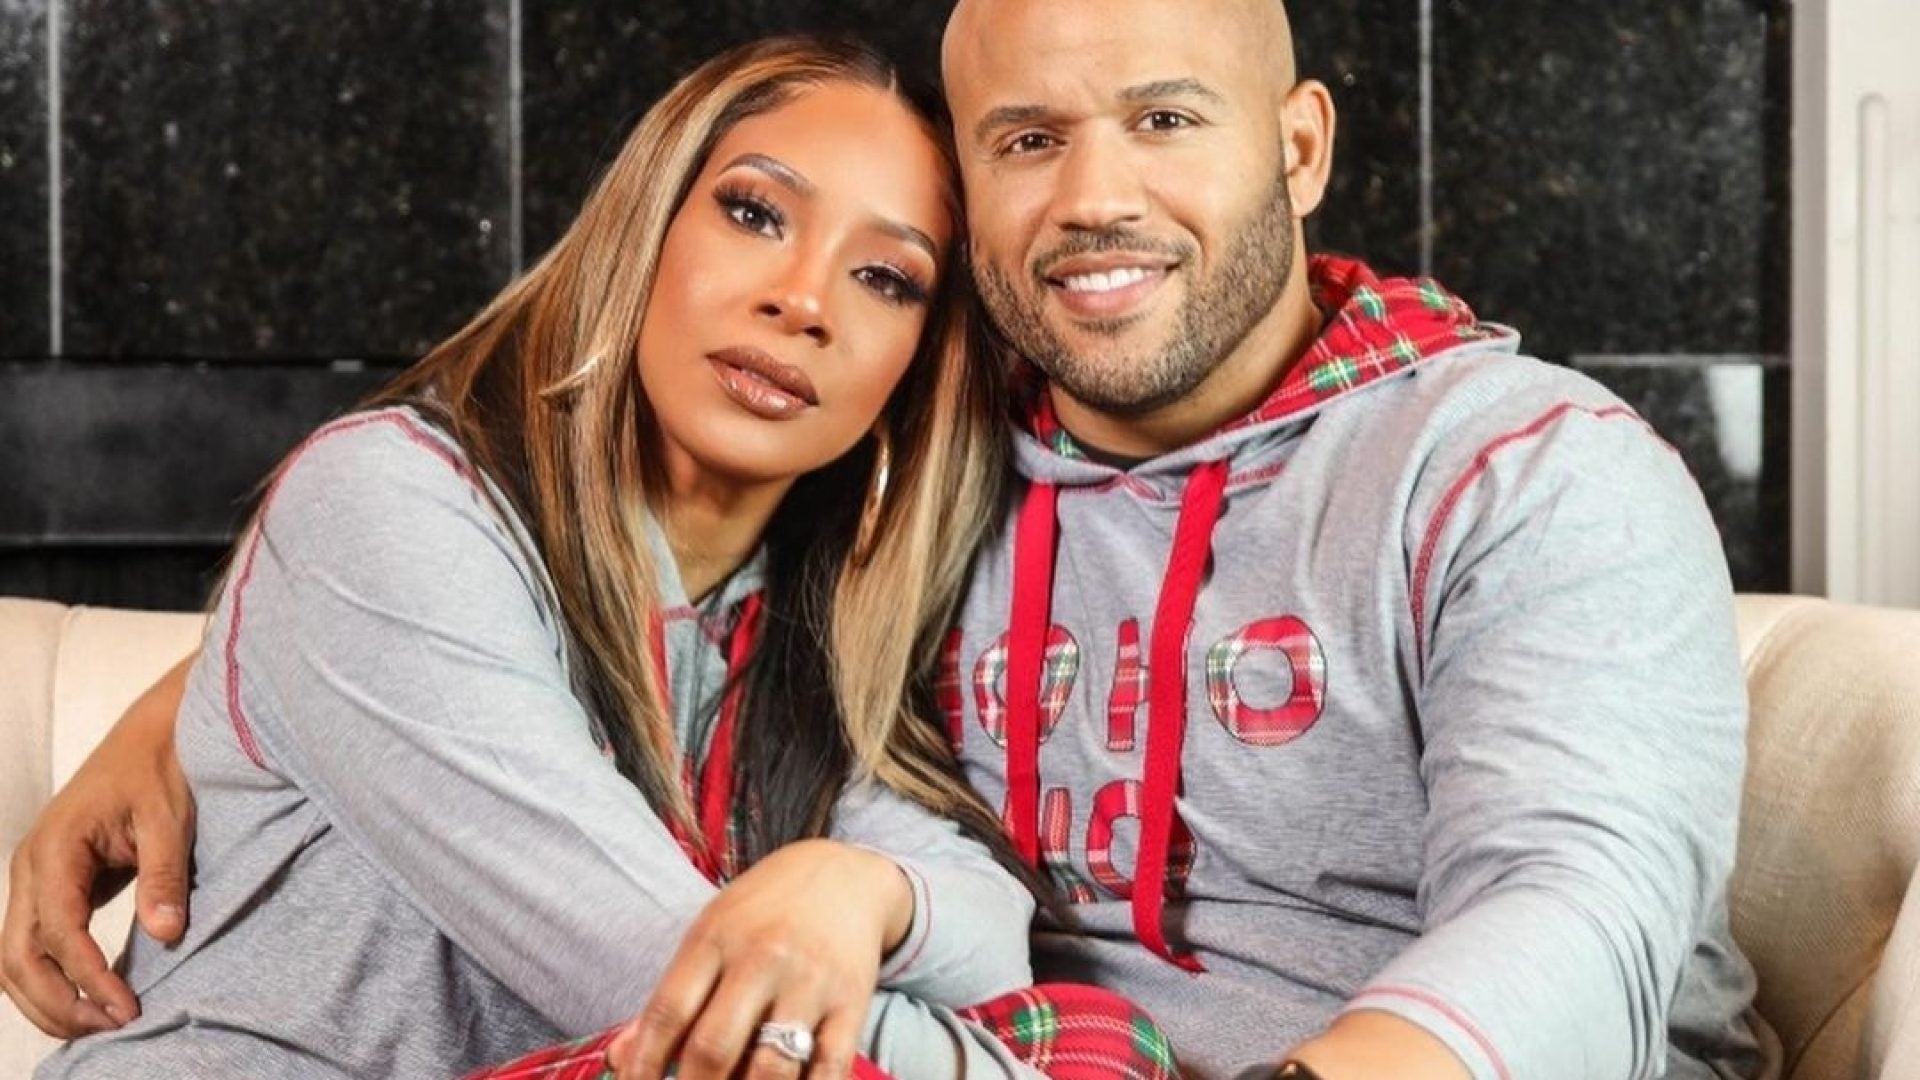 Maurice And Kimmi Scott Say It Took Backlash, Counseling, For Him To See Issue With Viral 'Suffer Through Sex' Comments